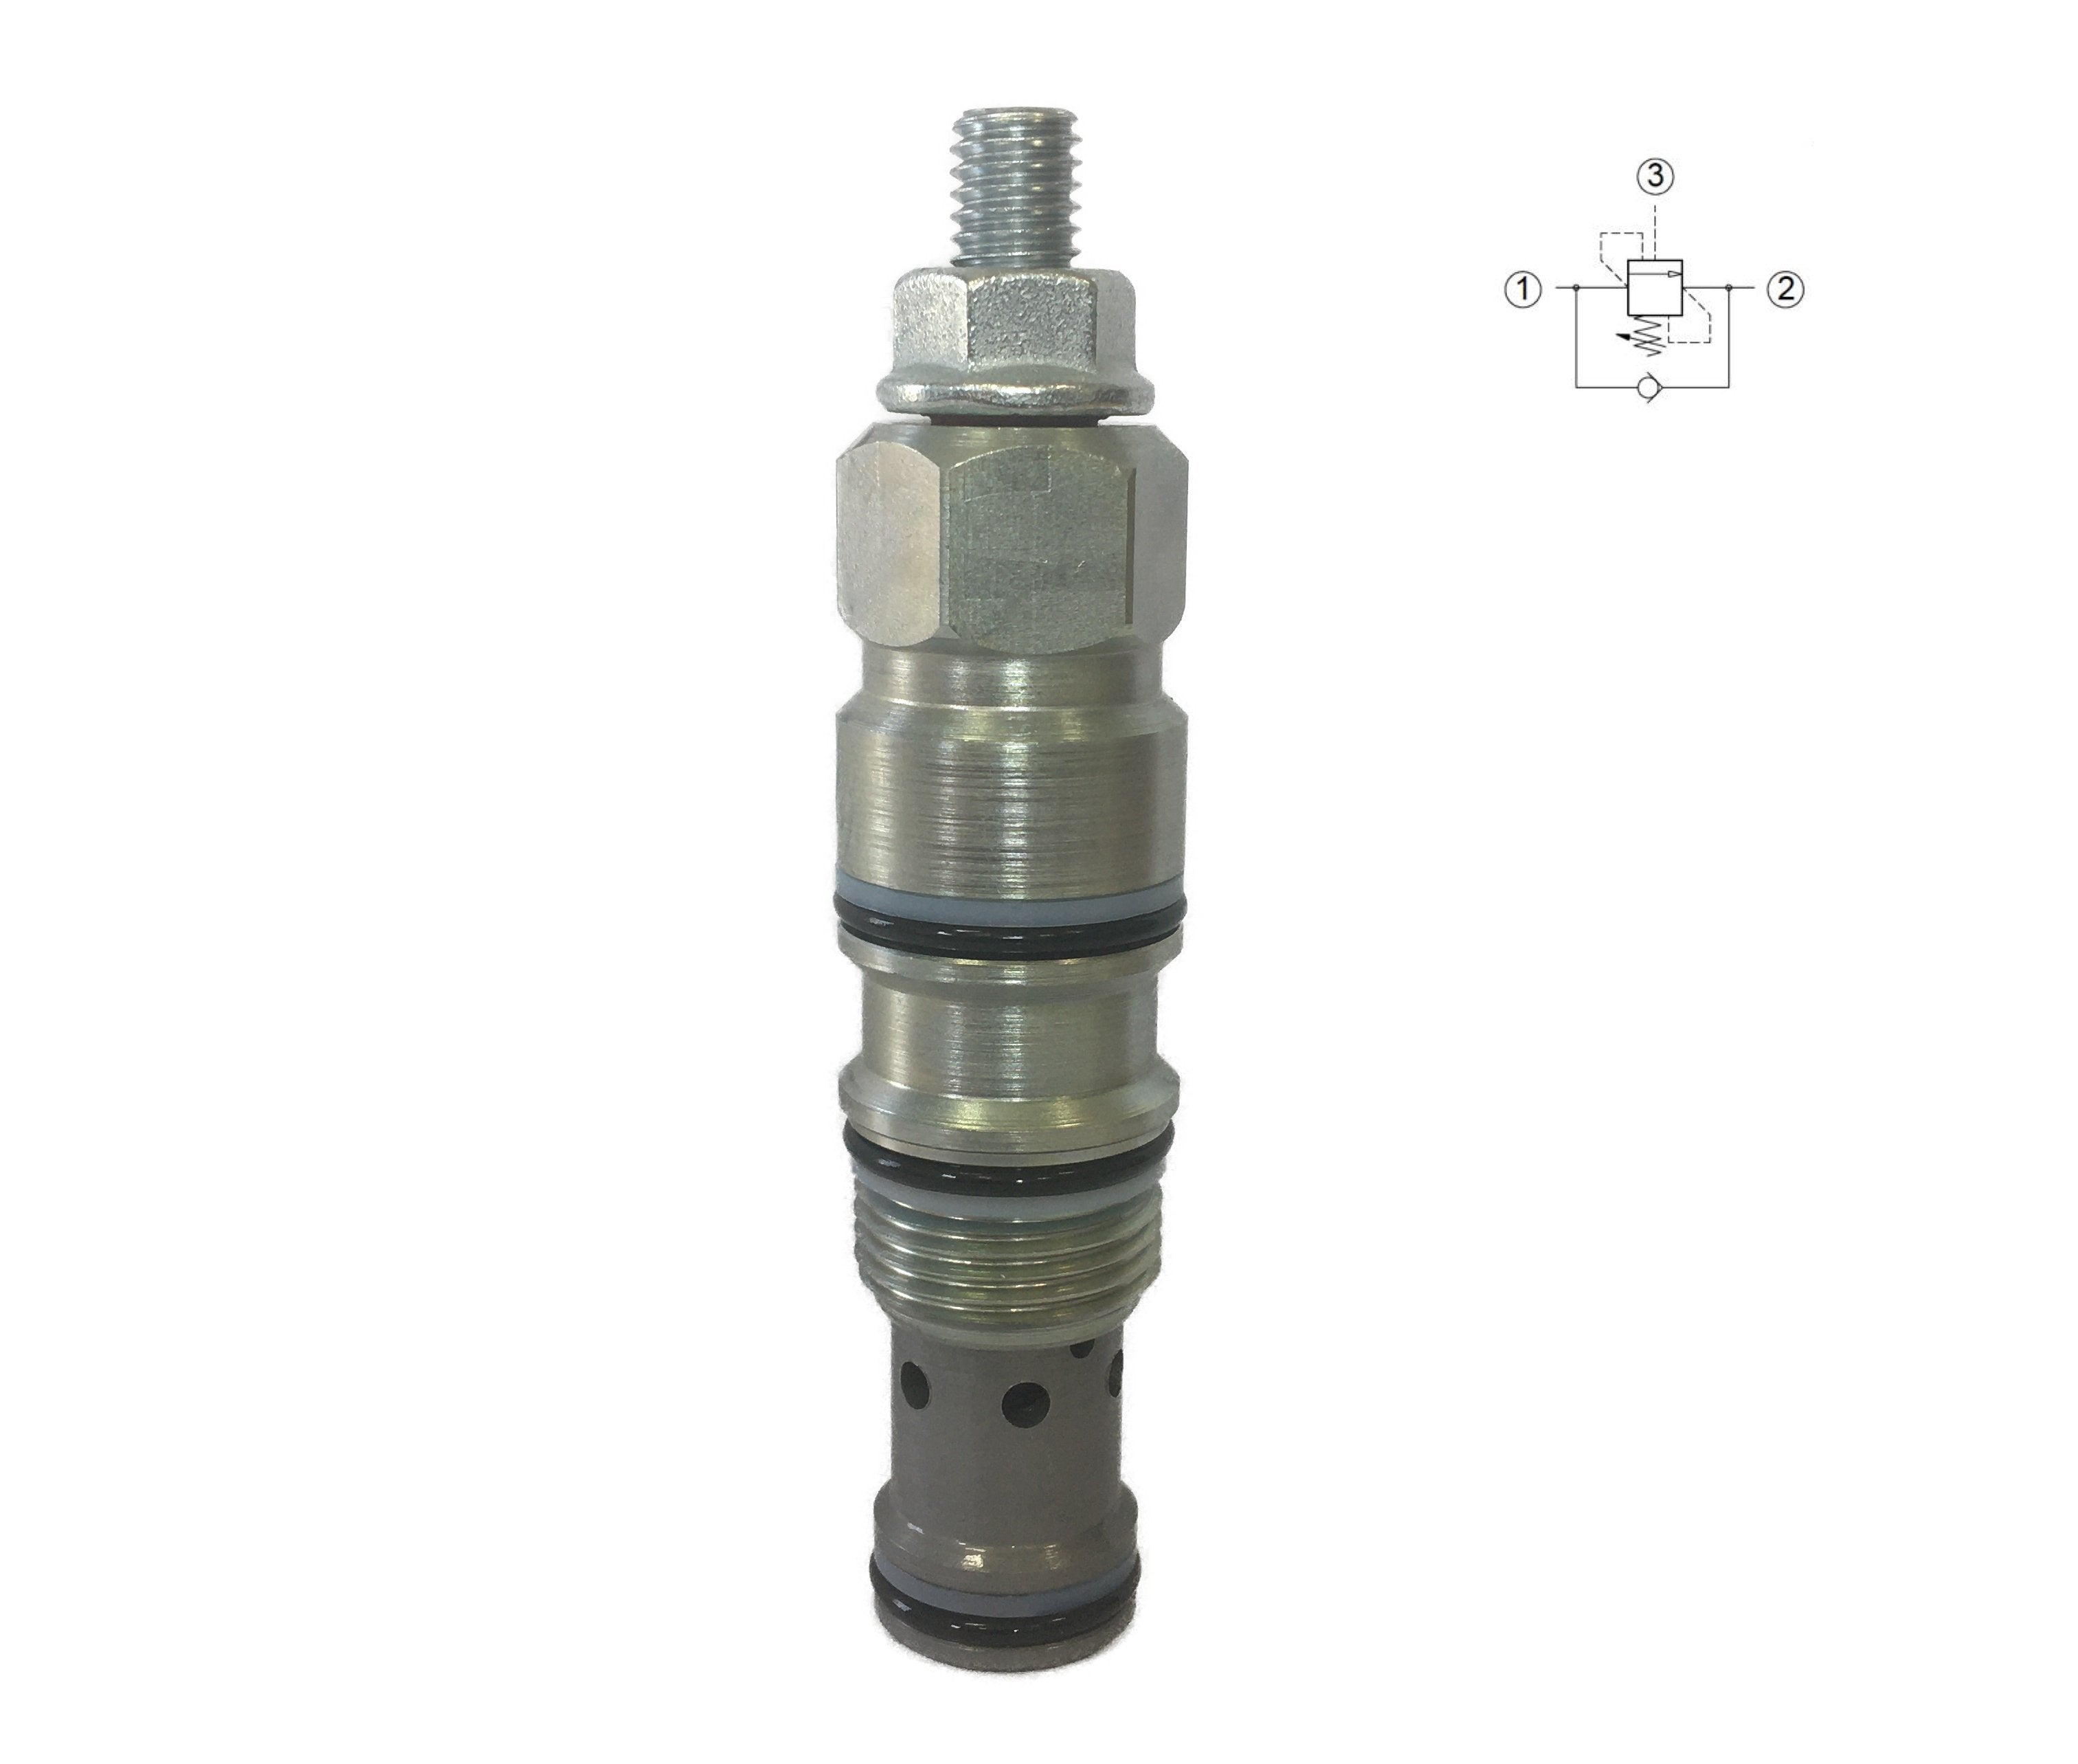 C200T060031100A : Valvole Counterbalance, 3:1, 20 GPM, 5000psi, 507 to 1522psi adjustable, 870psi Preset, T-11A